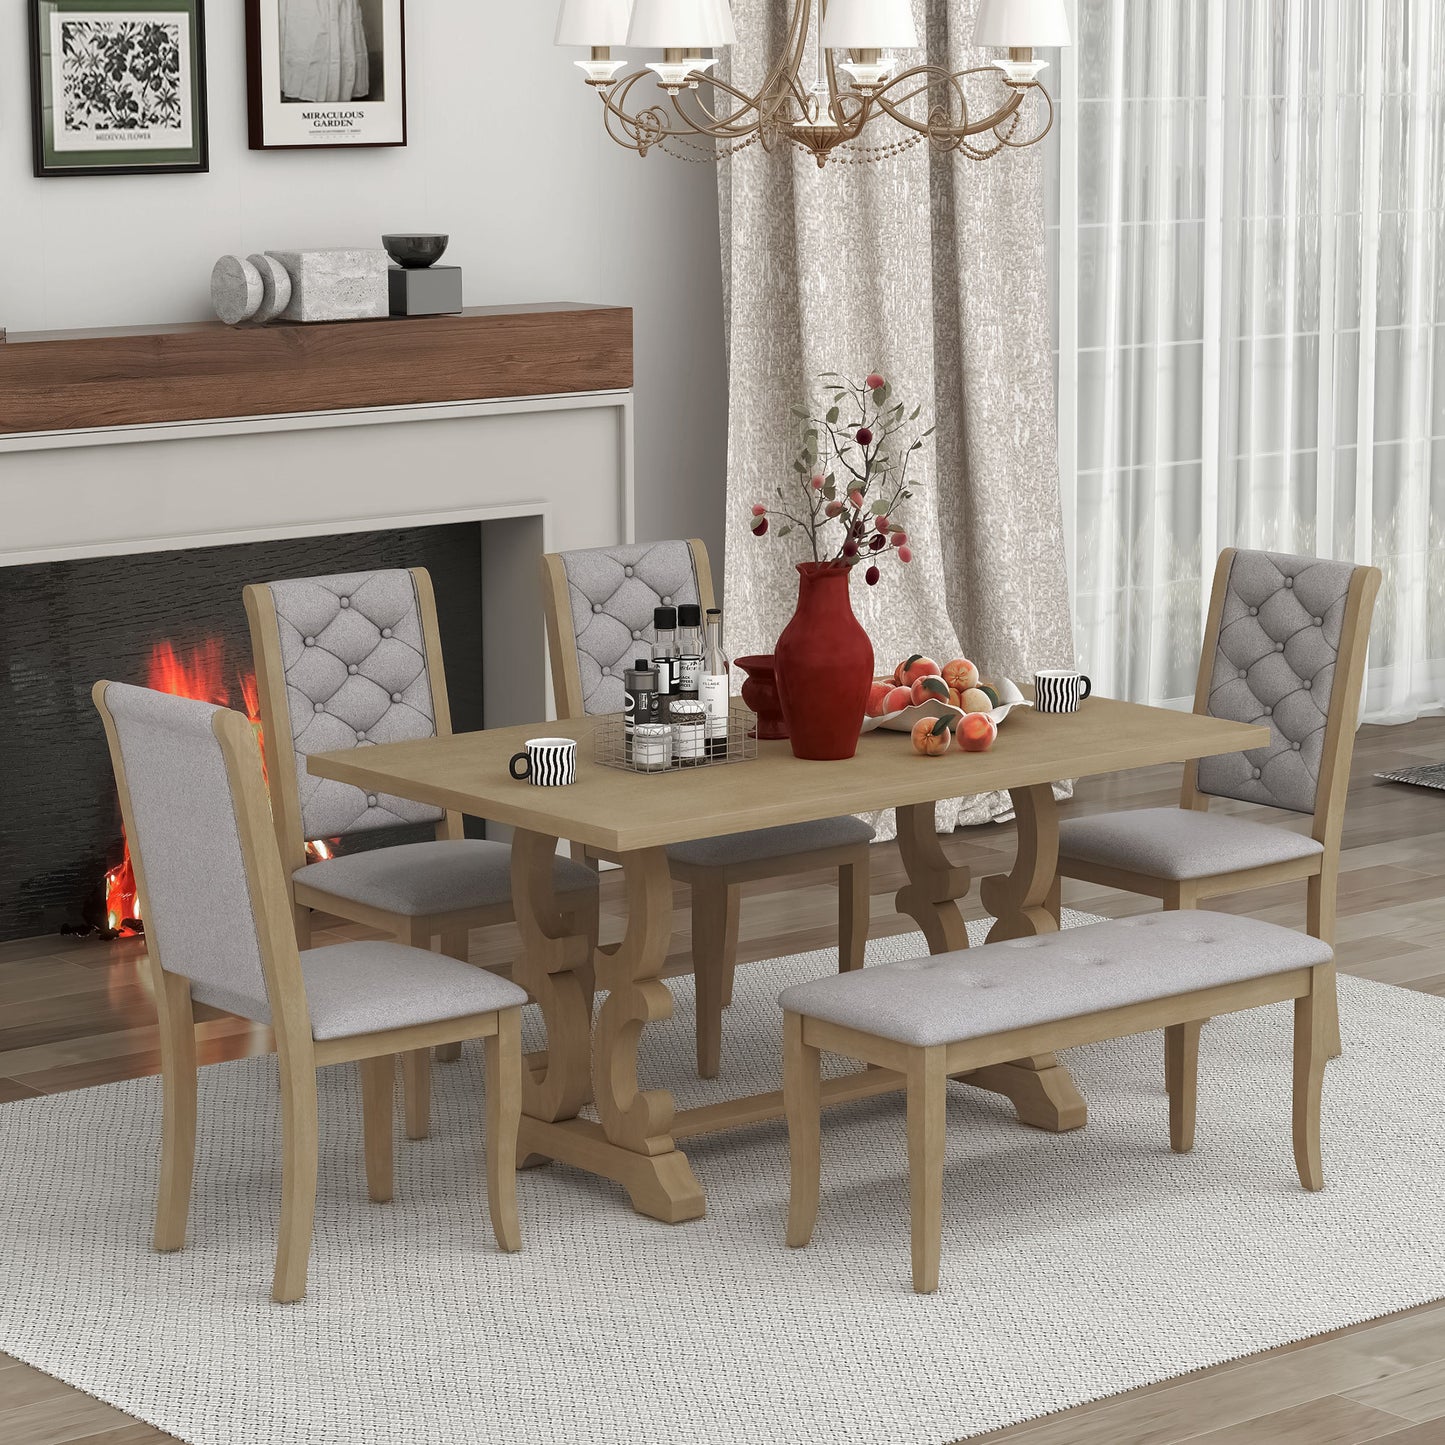 6-Piece Retro Dining Set with Unique Scroll Table Legs and Upholstered Seats  (Grey Wash)